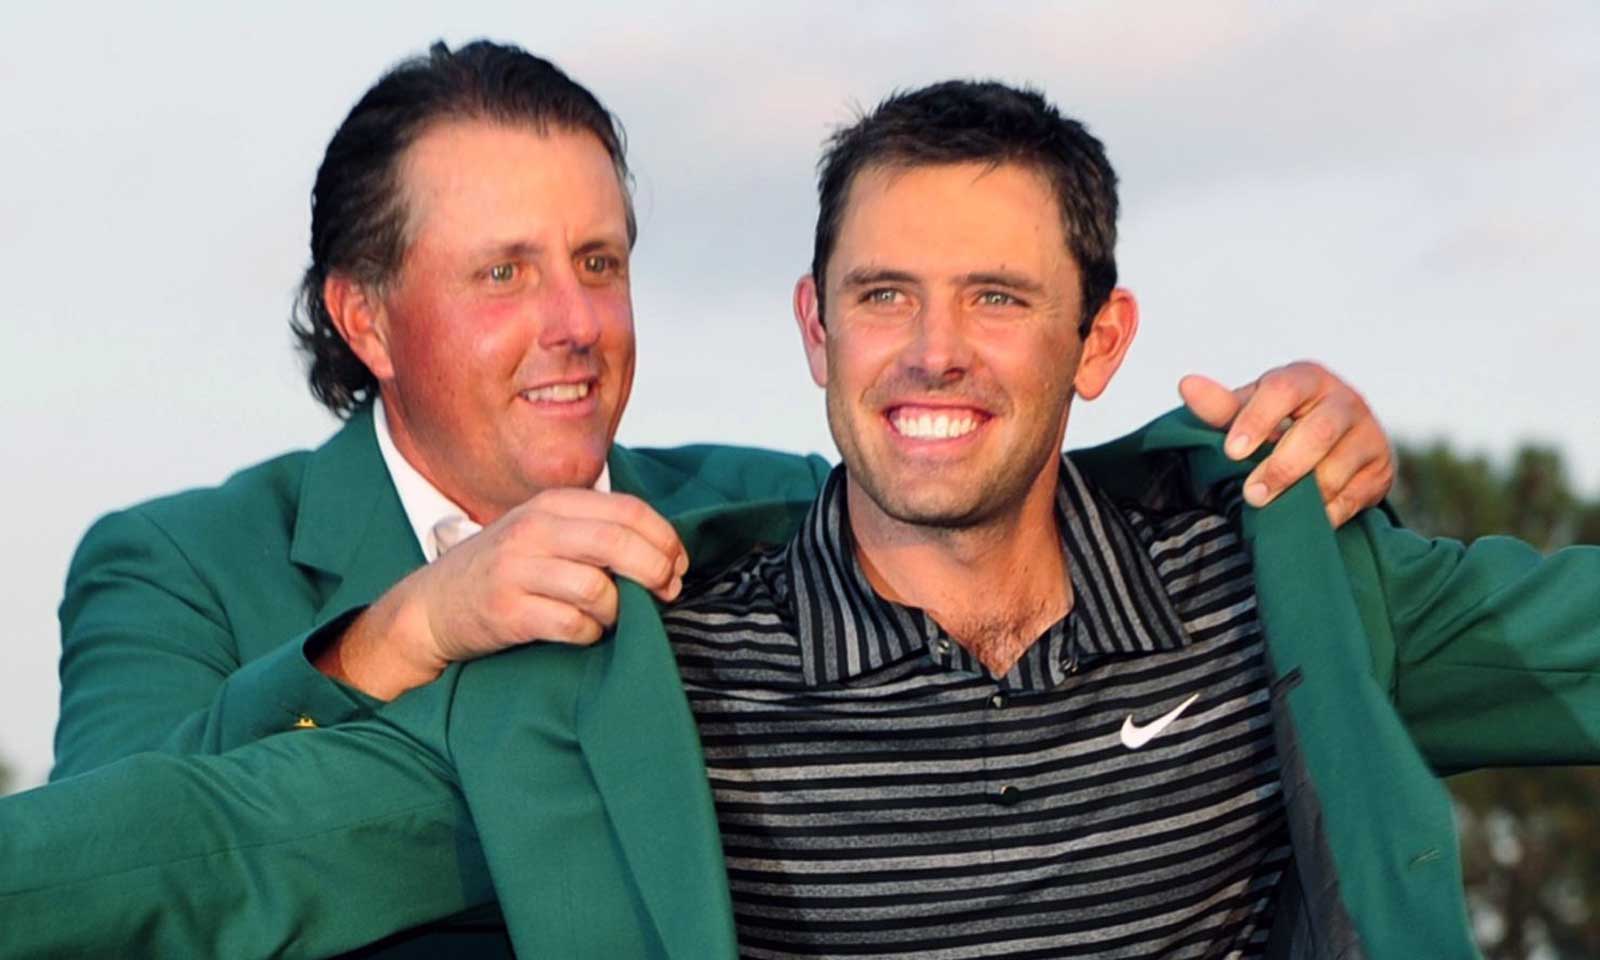 The-Greatest-Upsets-in-Augusta-Masters-History-Charl-Schwartzel